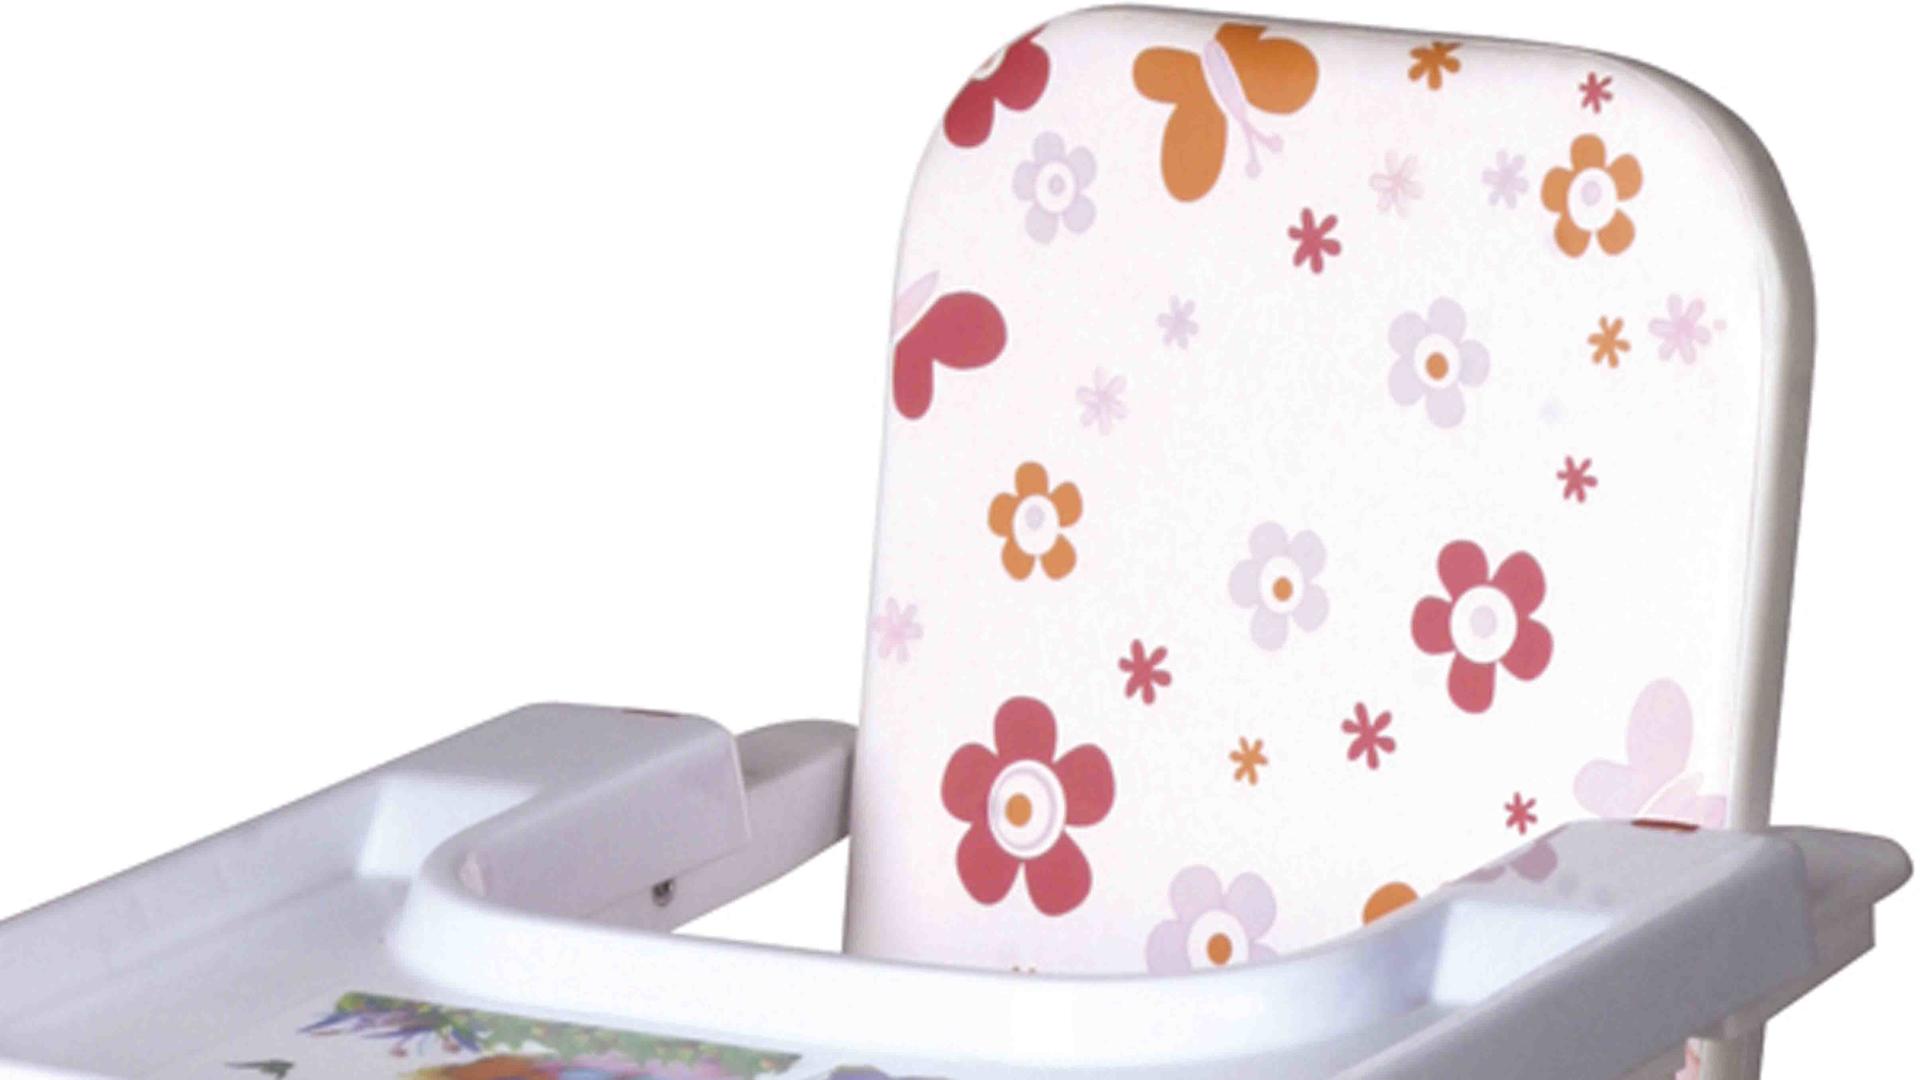 Aoqi special baby feeding high chair manufacturer for livingroom